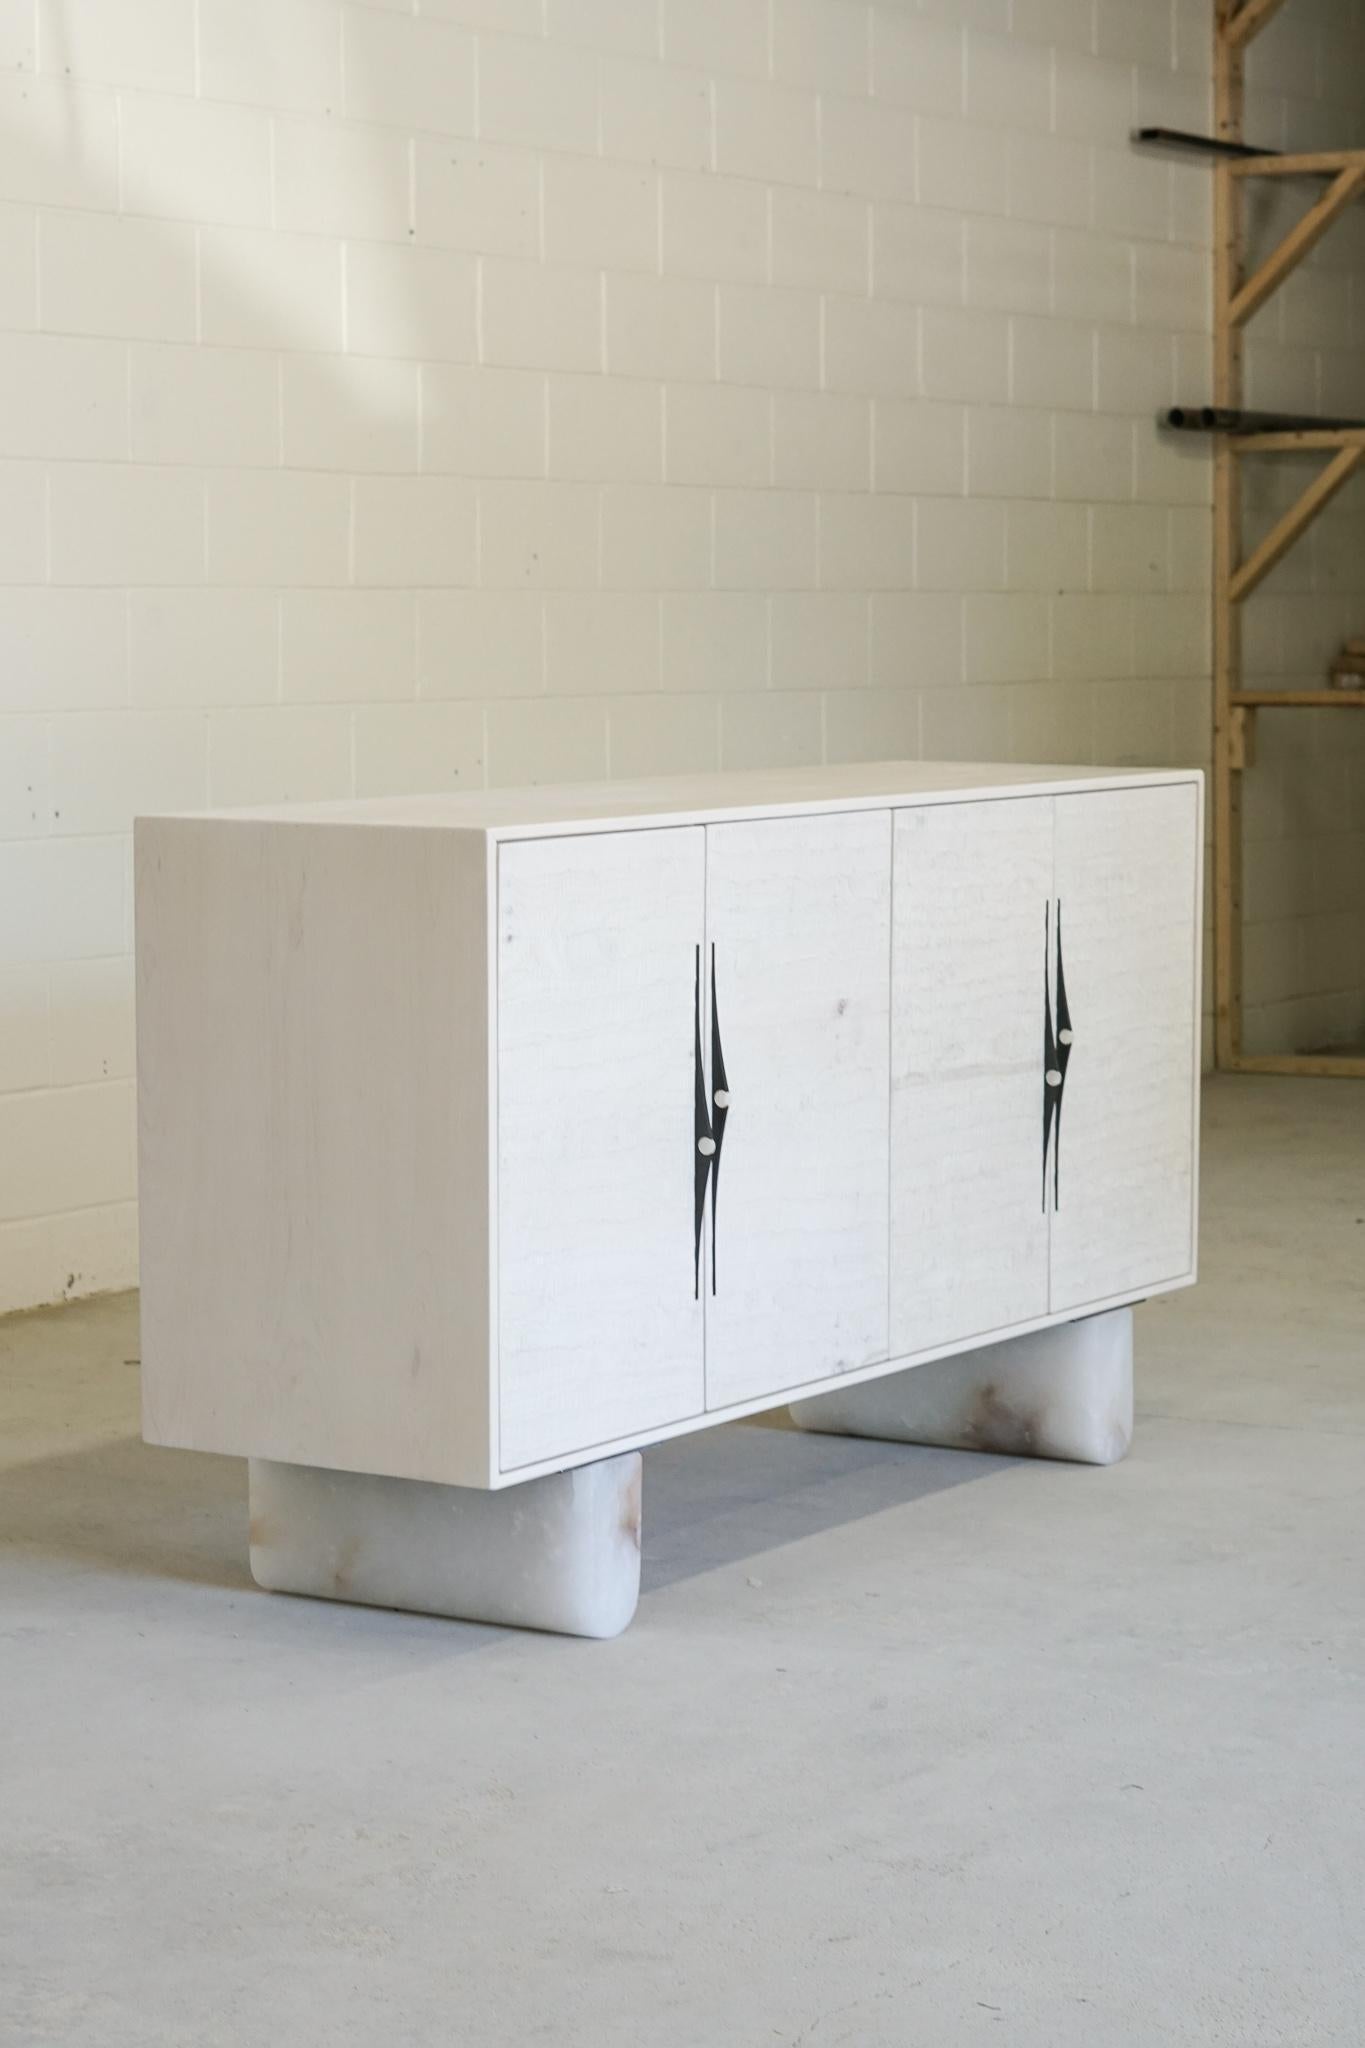 Swell sideboards 72 by Swell Studio
Dimensions: W 183 x D 51 x H 92 cm
Material: Alabaster, bleached maple, blk patina’d brass pulls 
(Available in a variety of wood and stone species)
Also available in different sizes.

This piece is a